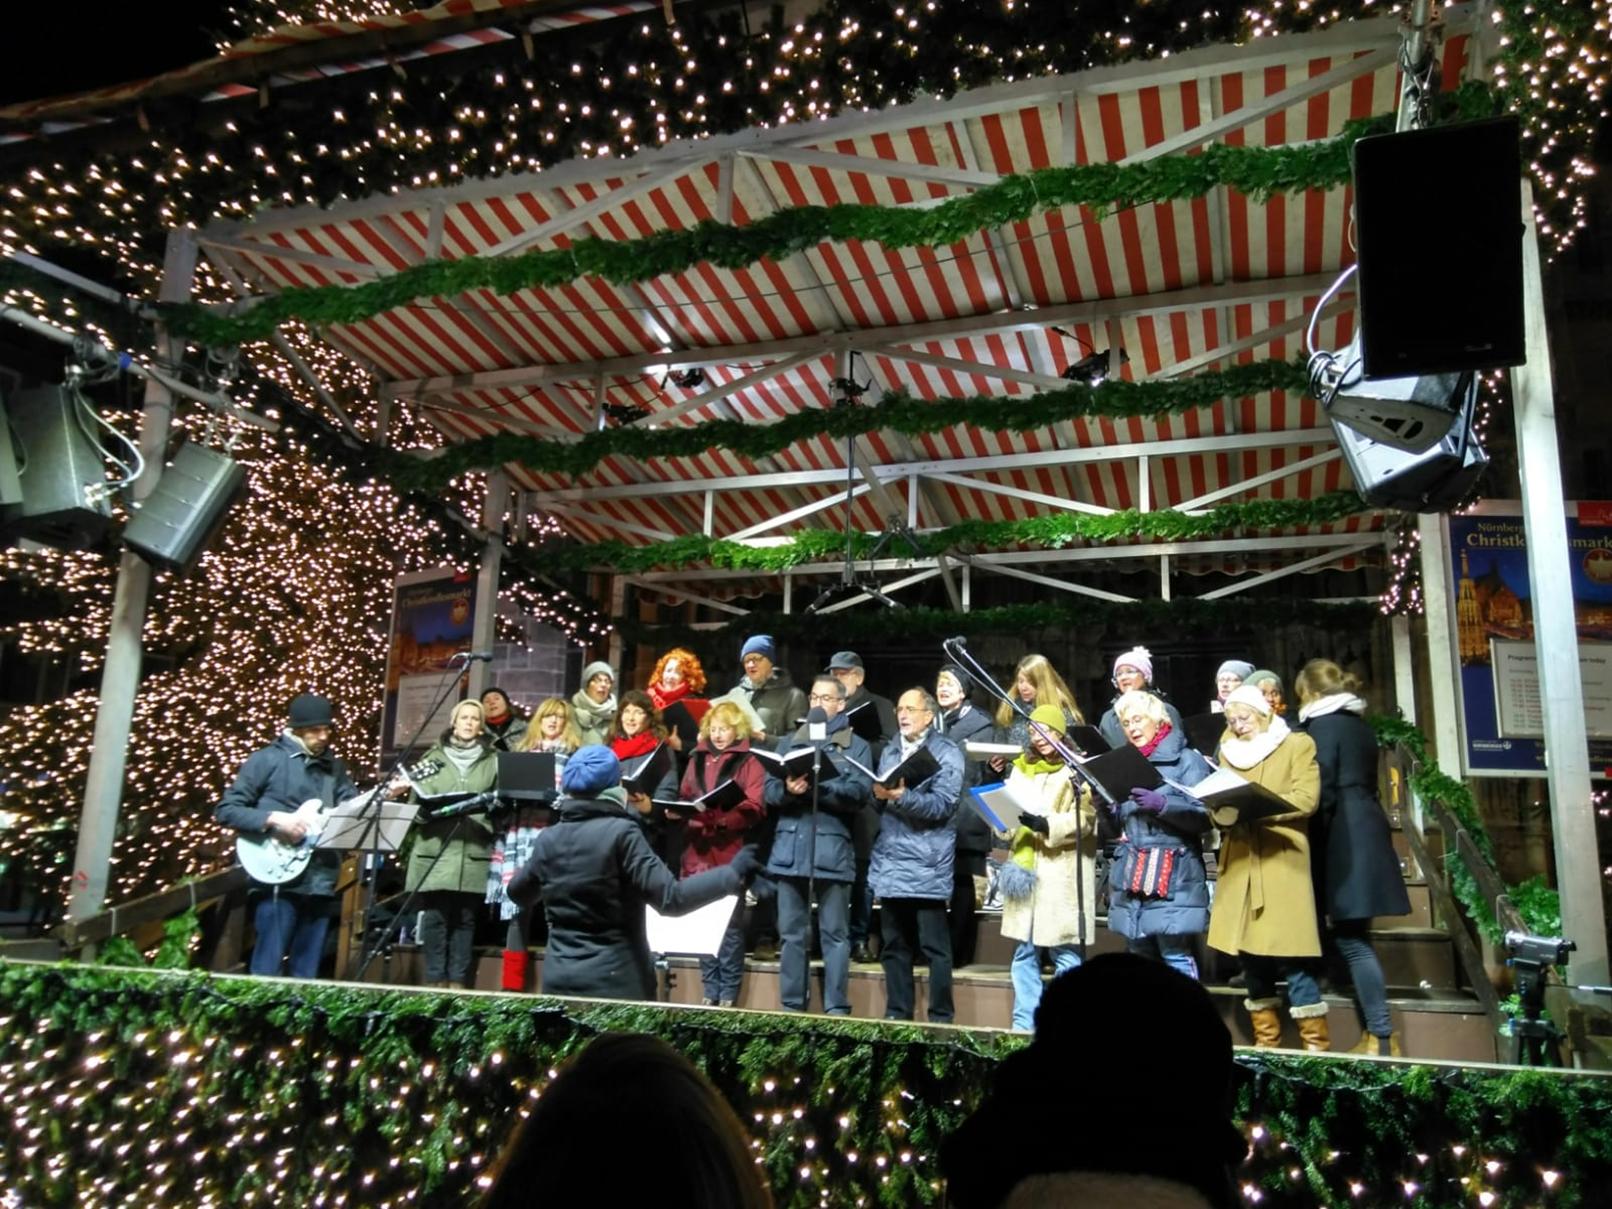 You are currently viewing St. Markus am Christkindlesmarkt 15.12.